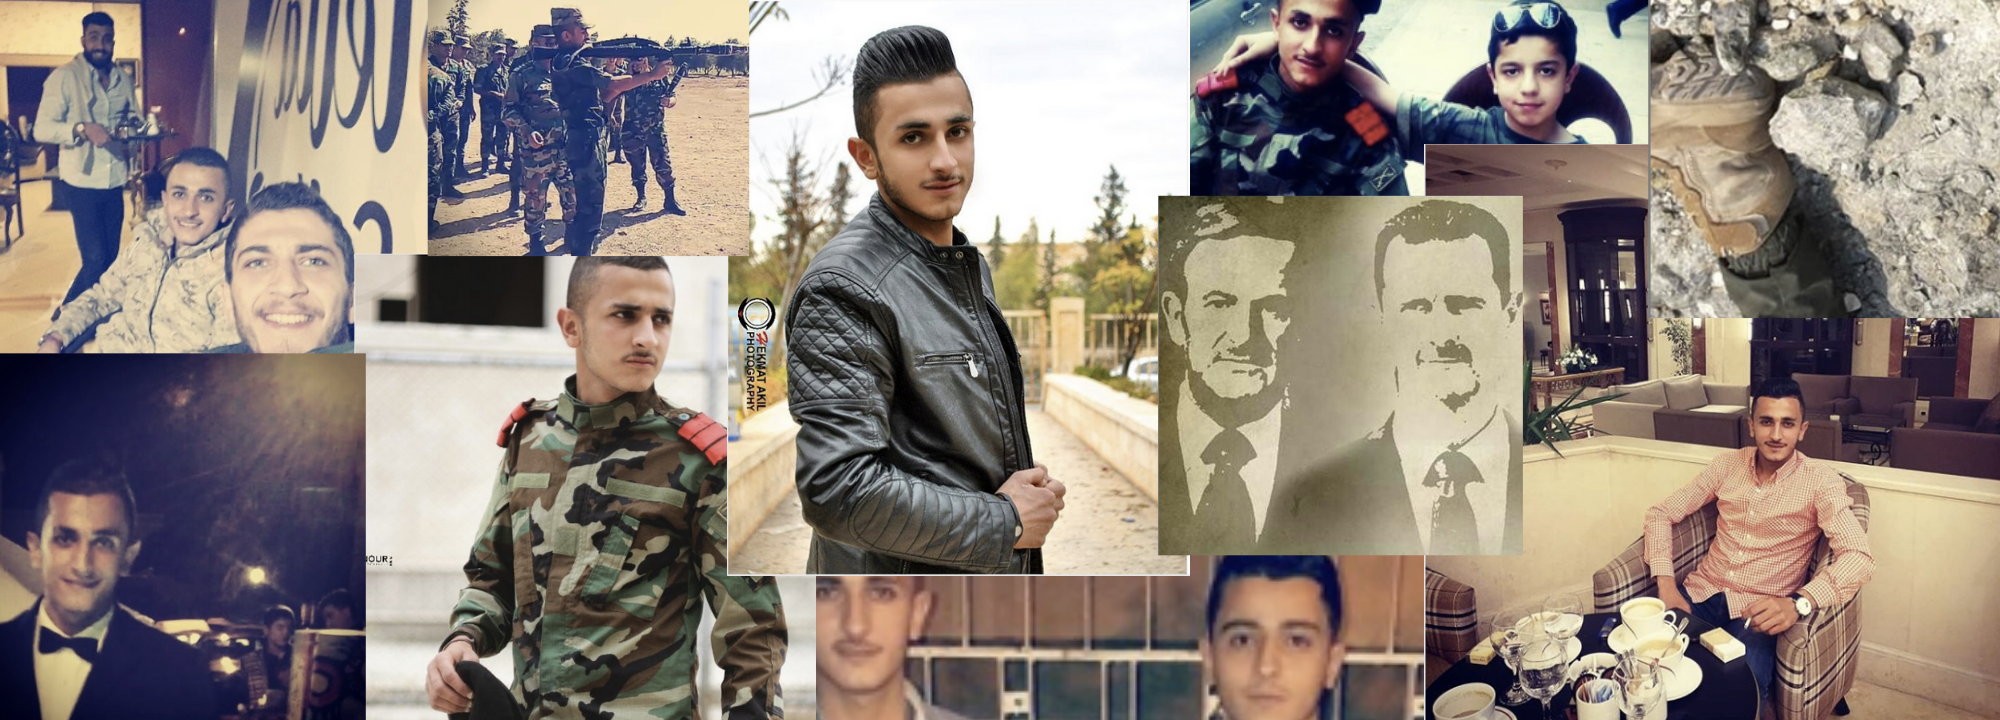 A Syrian Soldier’s Life and Death on Instagram